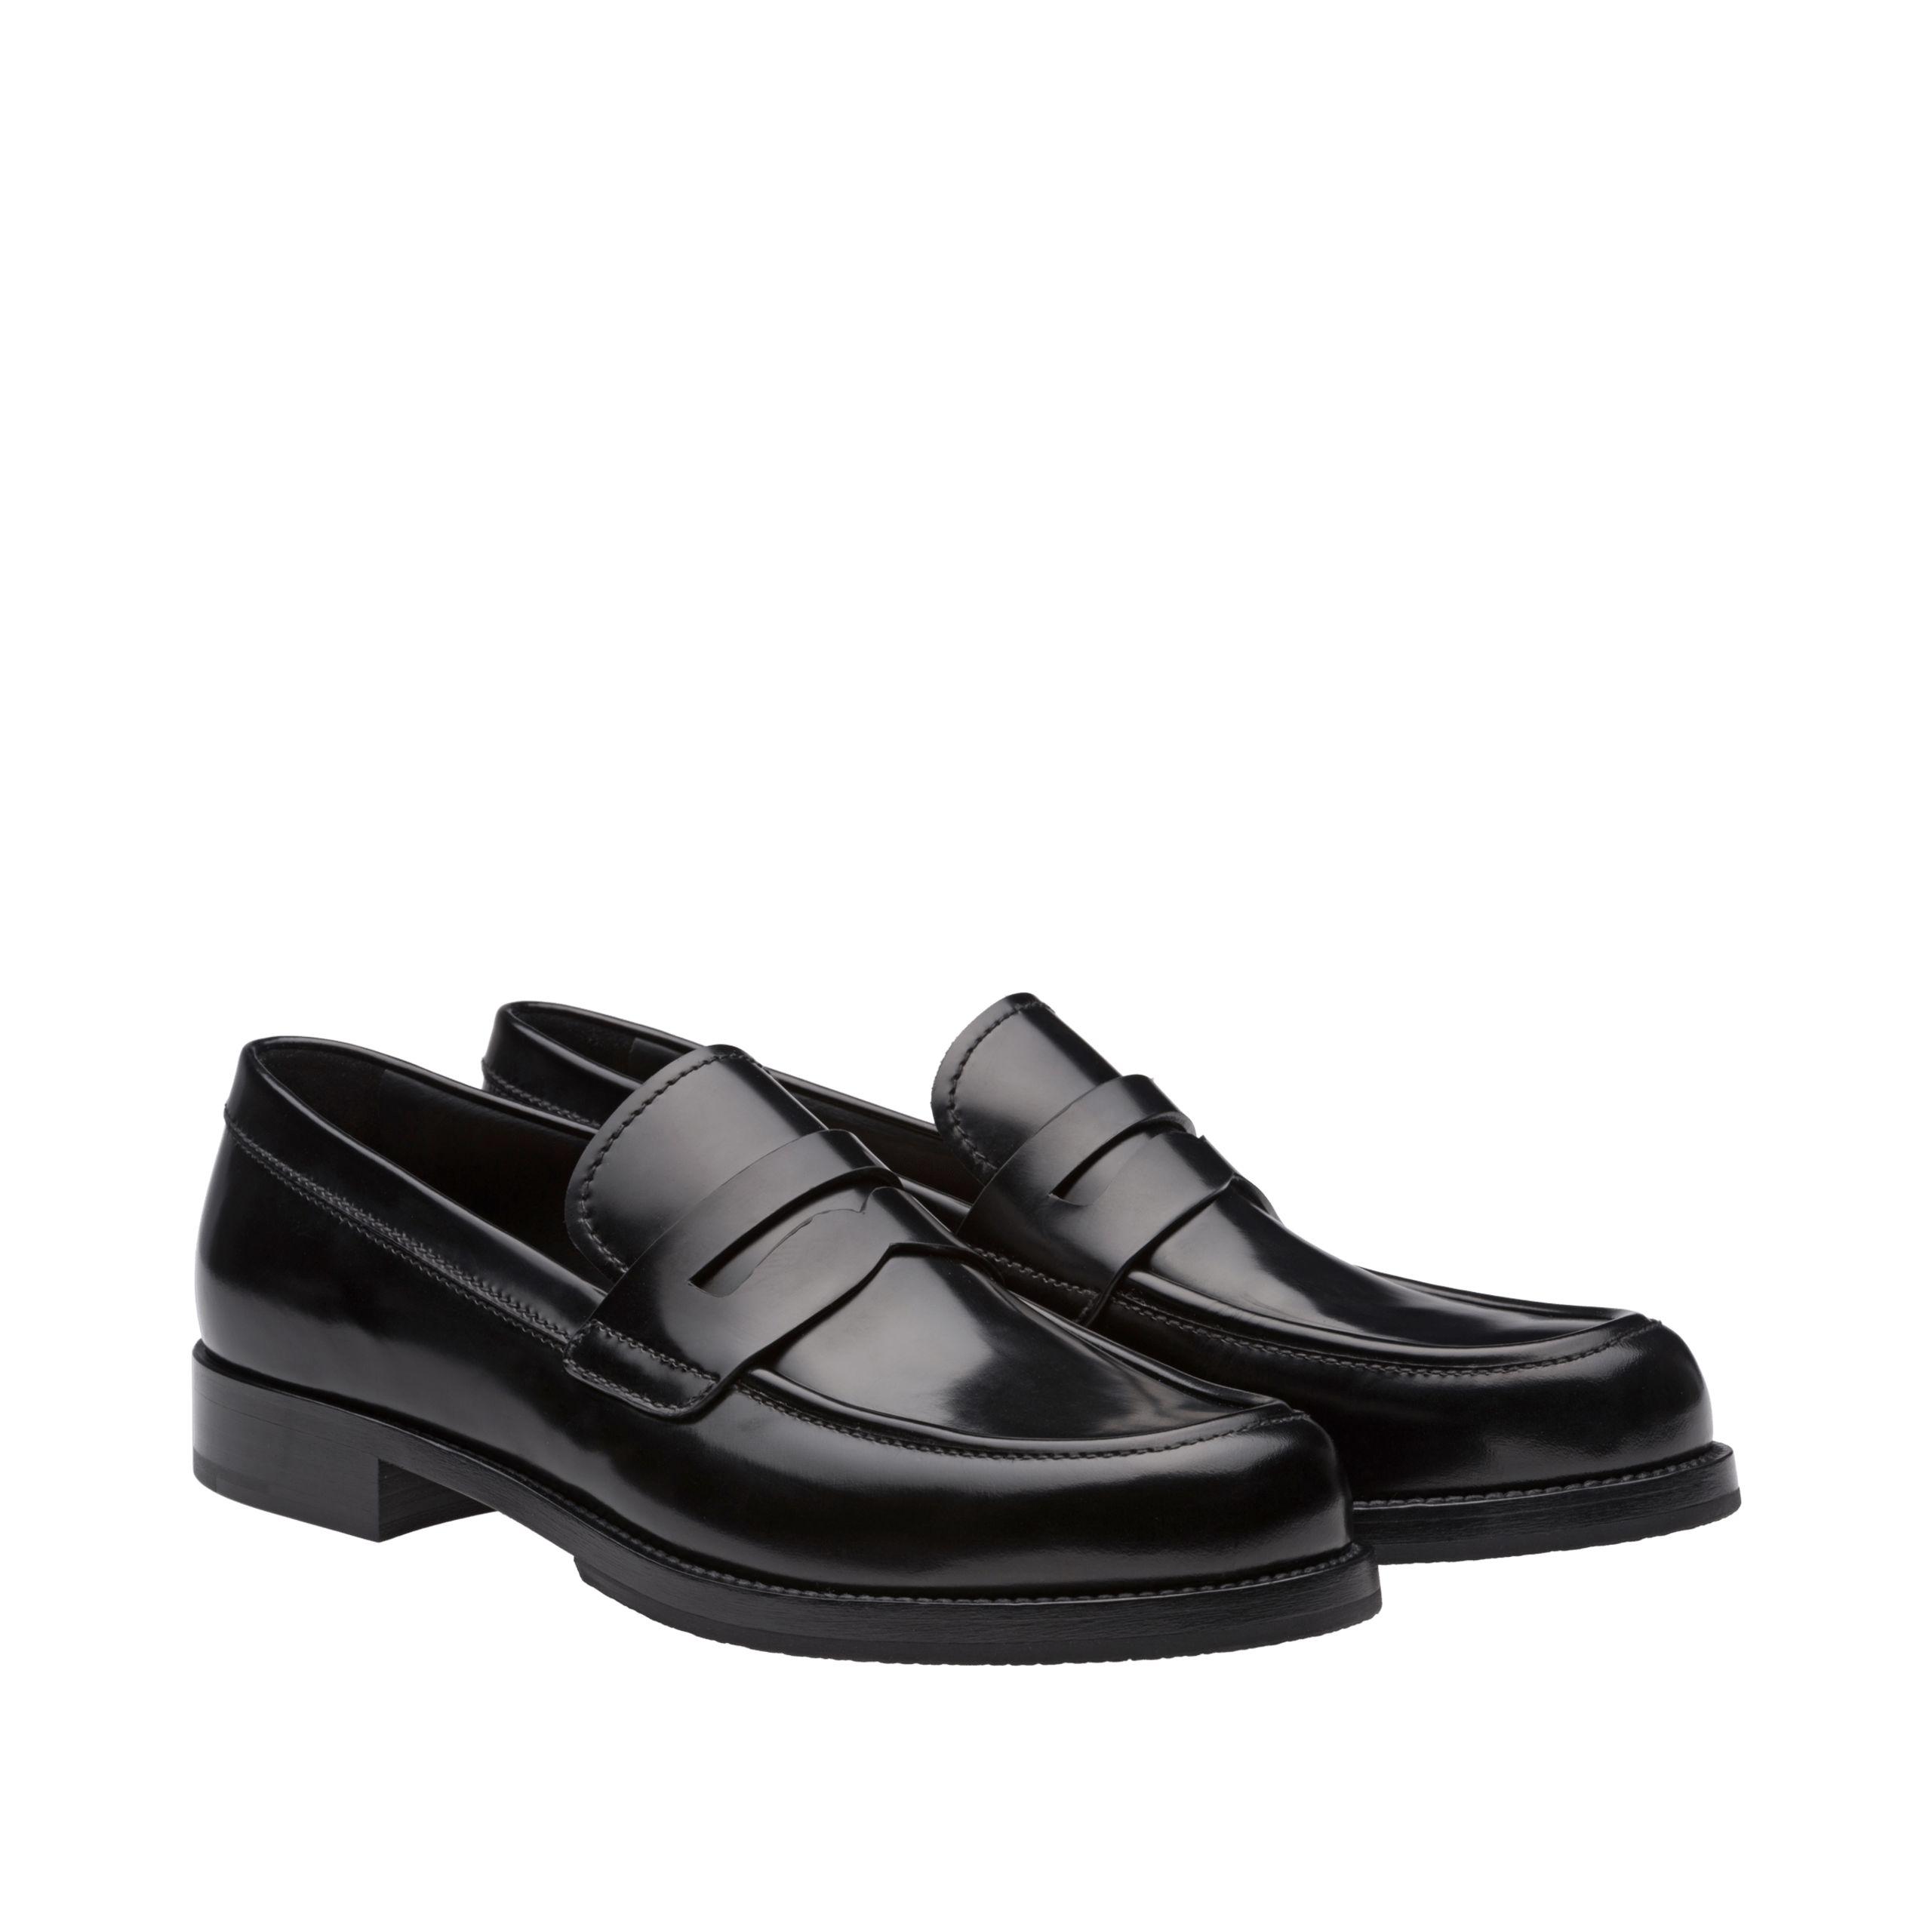 Prada Leather Brushed Loafers in Black for Men - Lyst